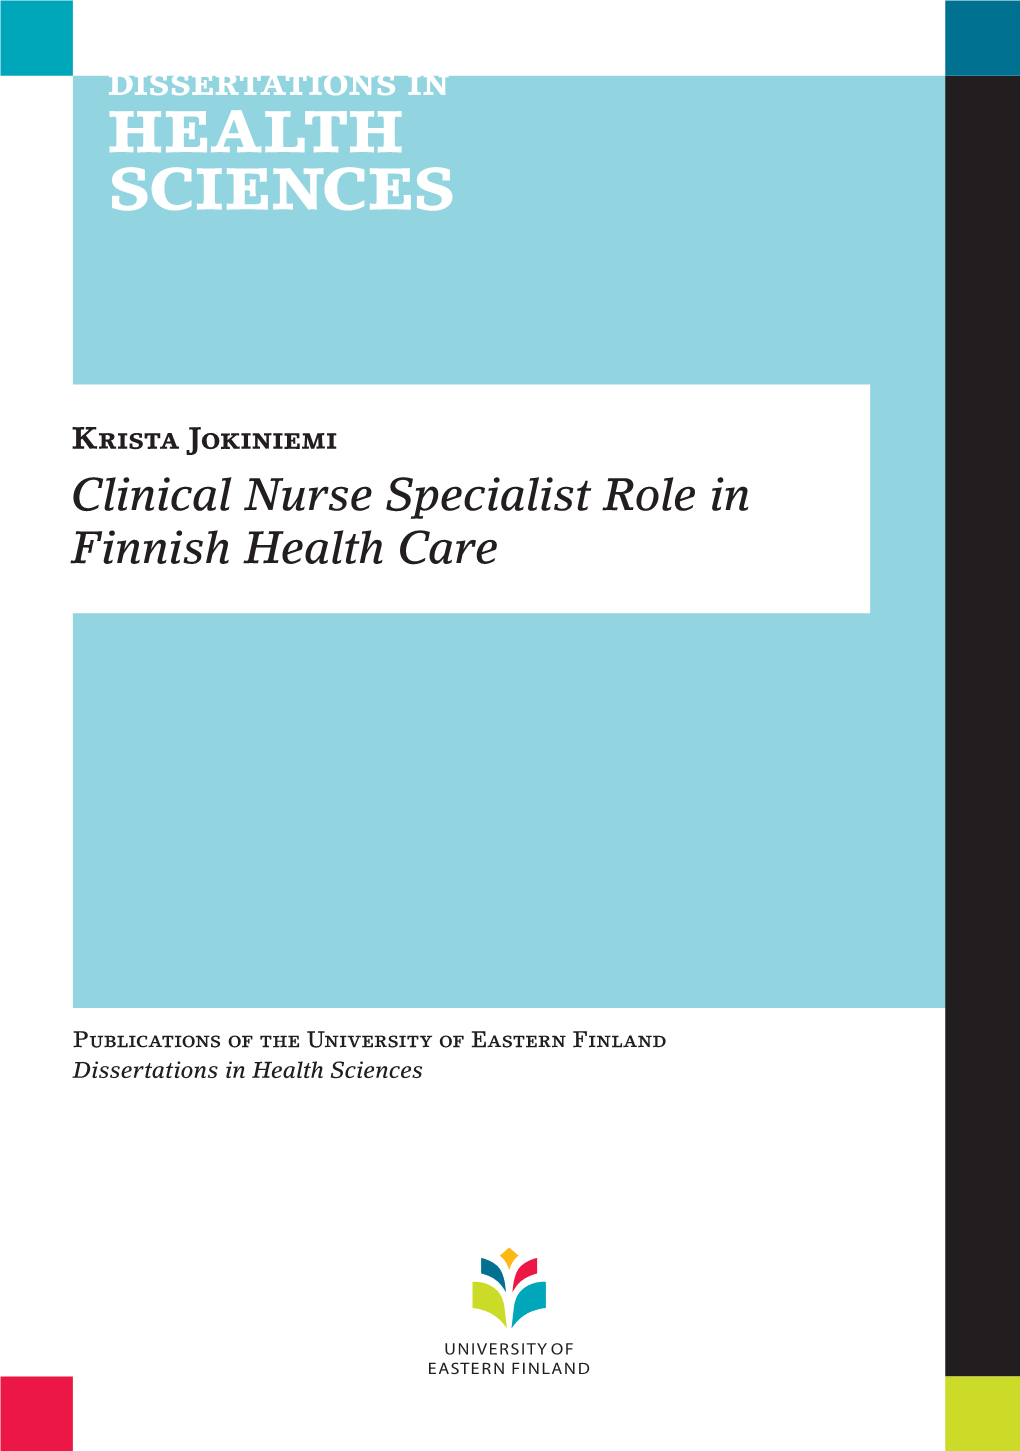 Clinical Nurse Specialist Role in Finnish Health Care